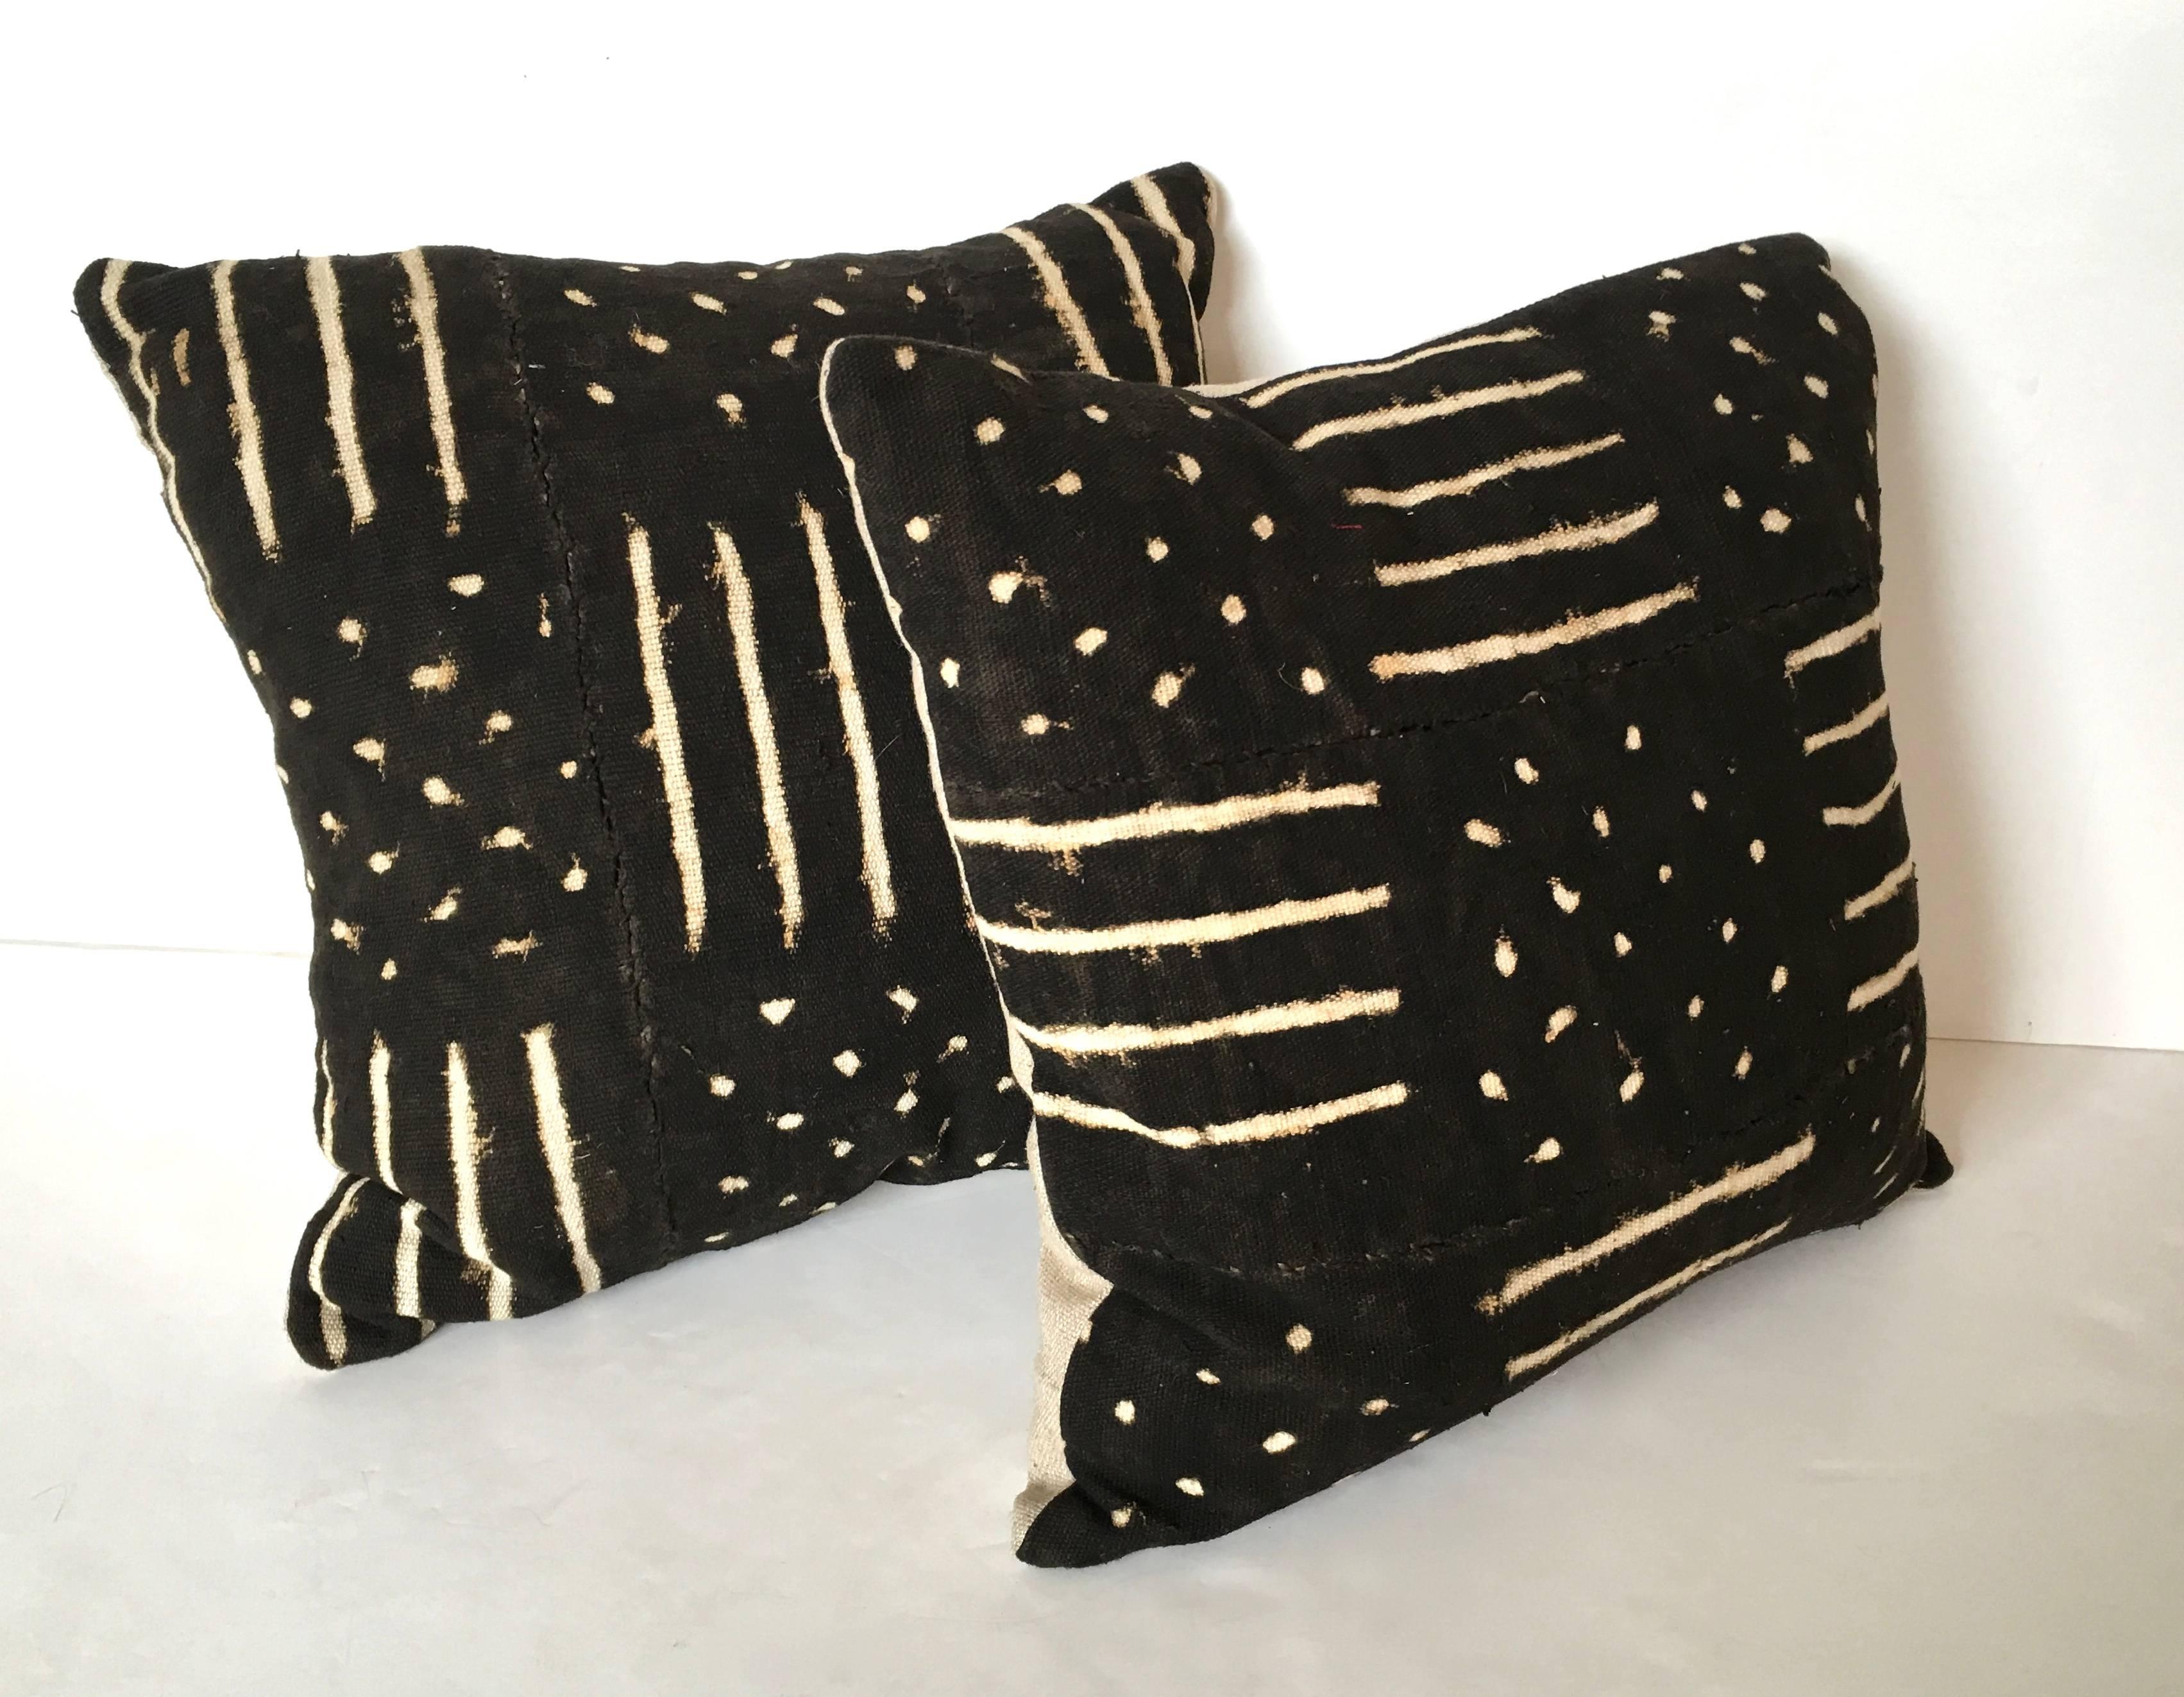 Dyed Handmade Black and White Graphic African Mud Cloth Pillows